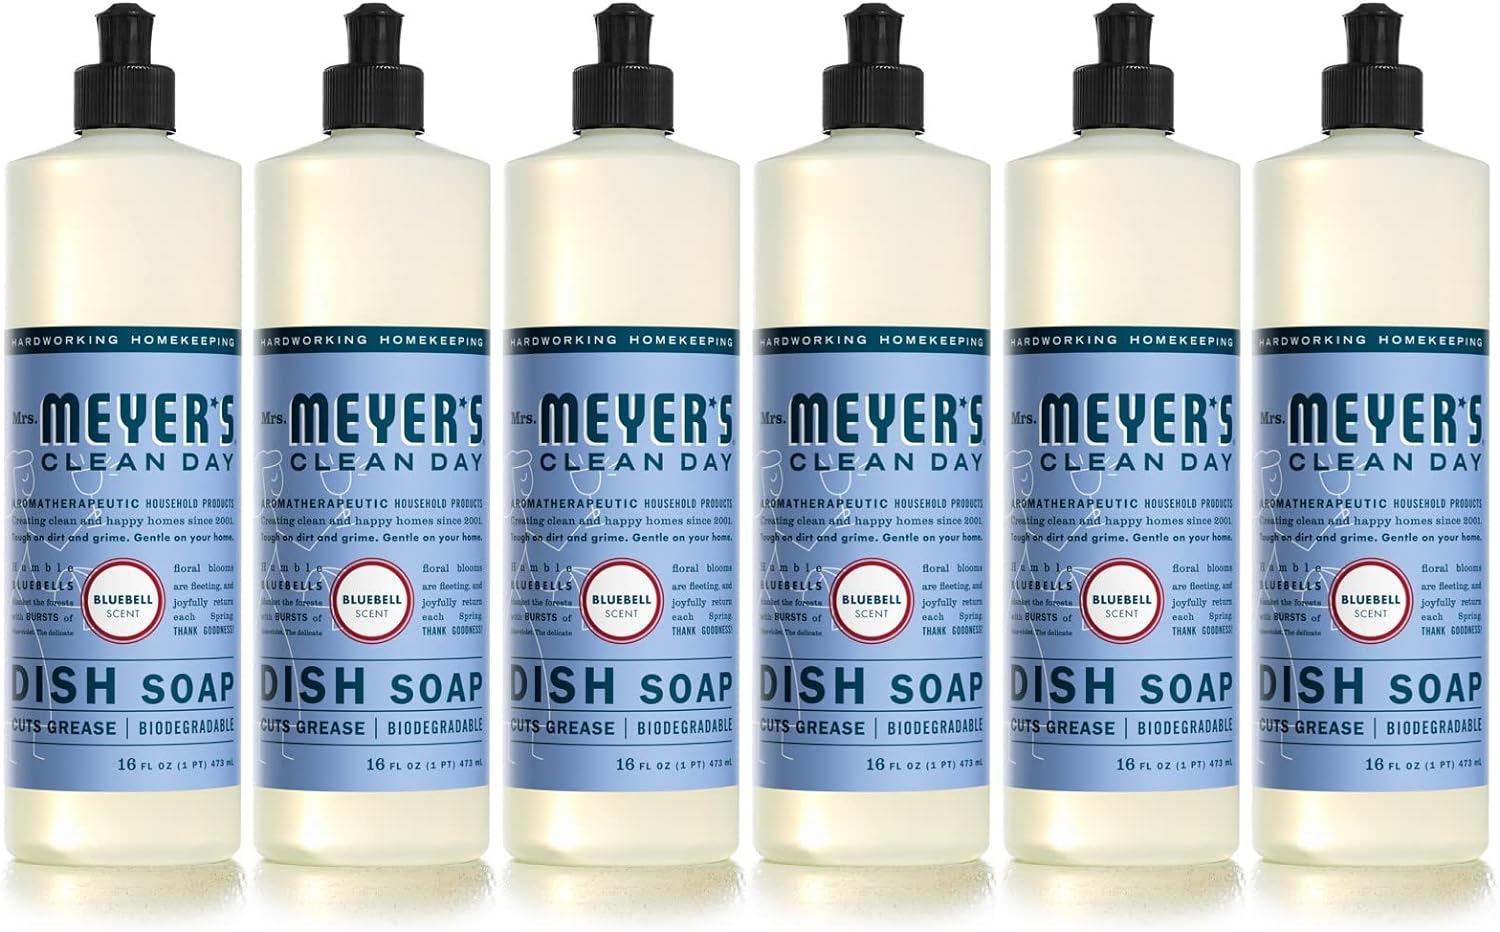 MRS. MEYER'S CLEAN DAY Liquid Dish Soap (16 Ounce (Pack - 6))